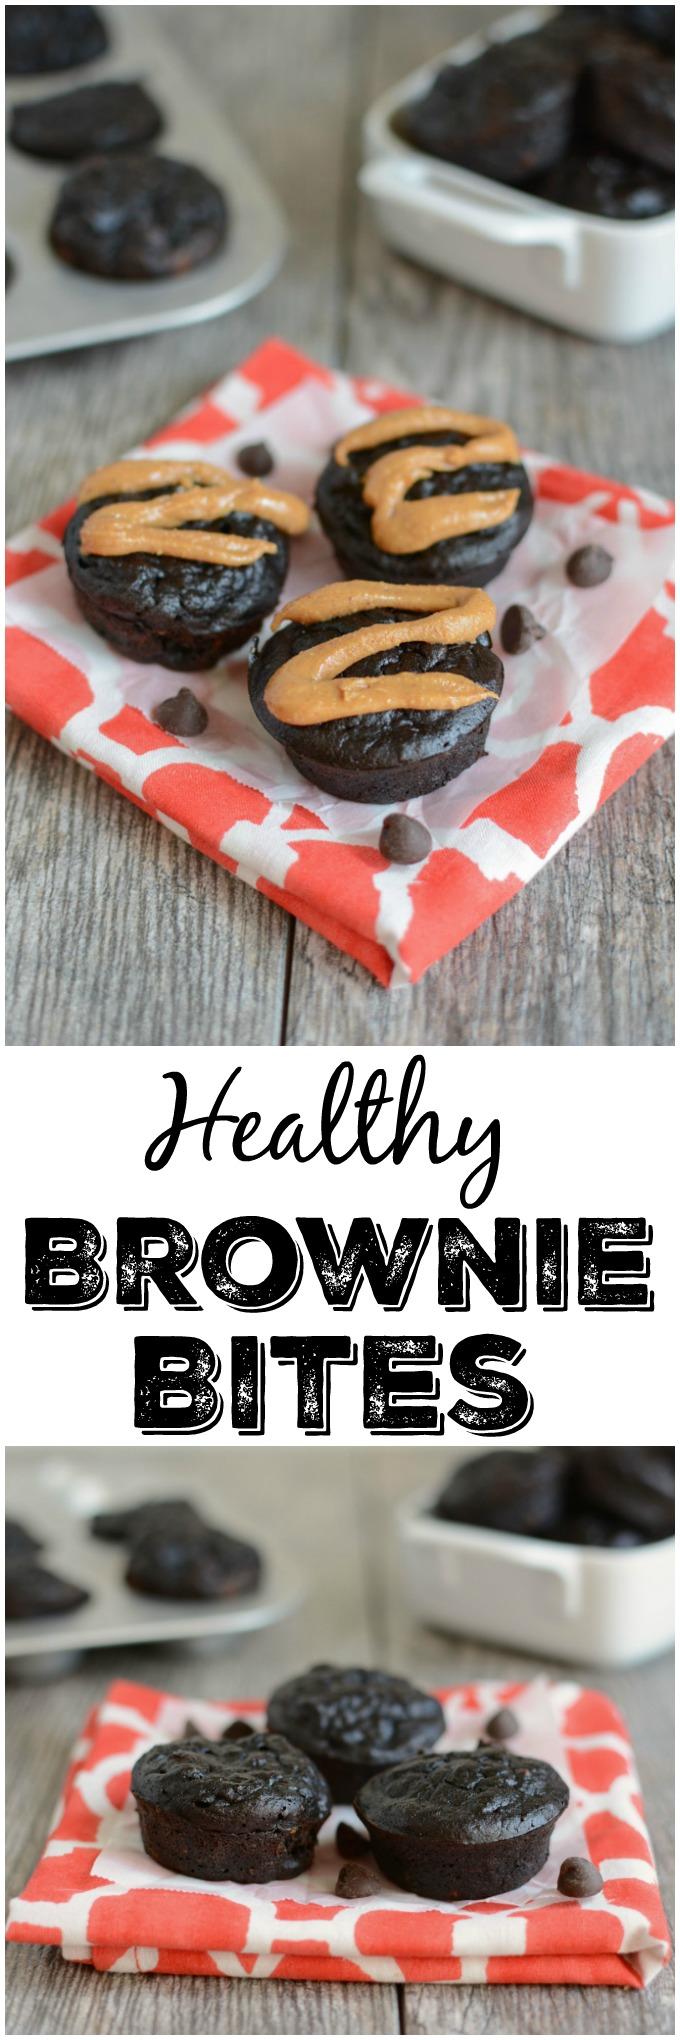 These Healthy Brownie Bites require just seven ingredients, are healthy enough for a snack and also make a great dessert recipe!